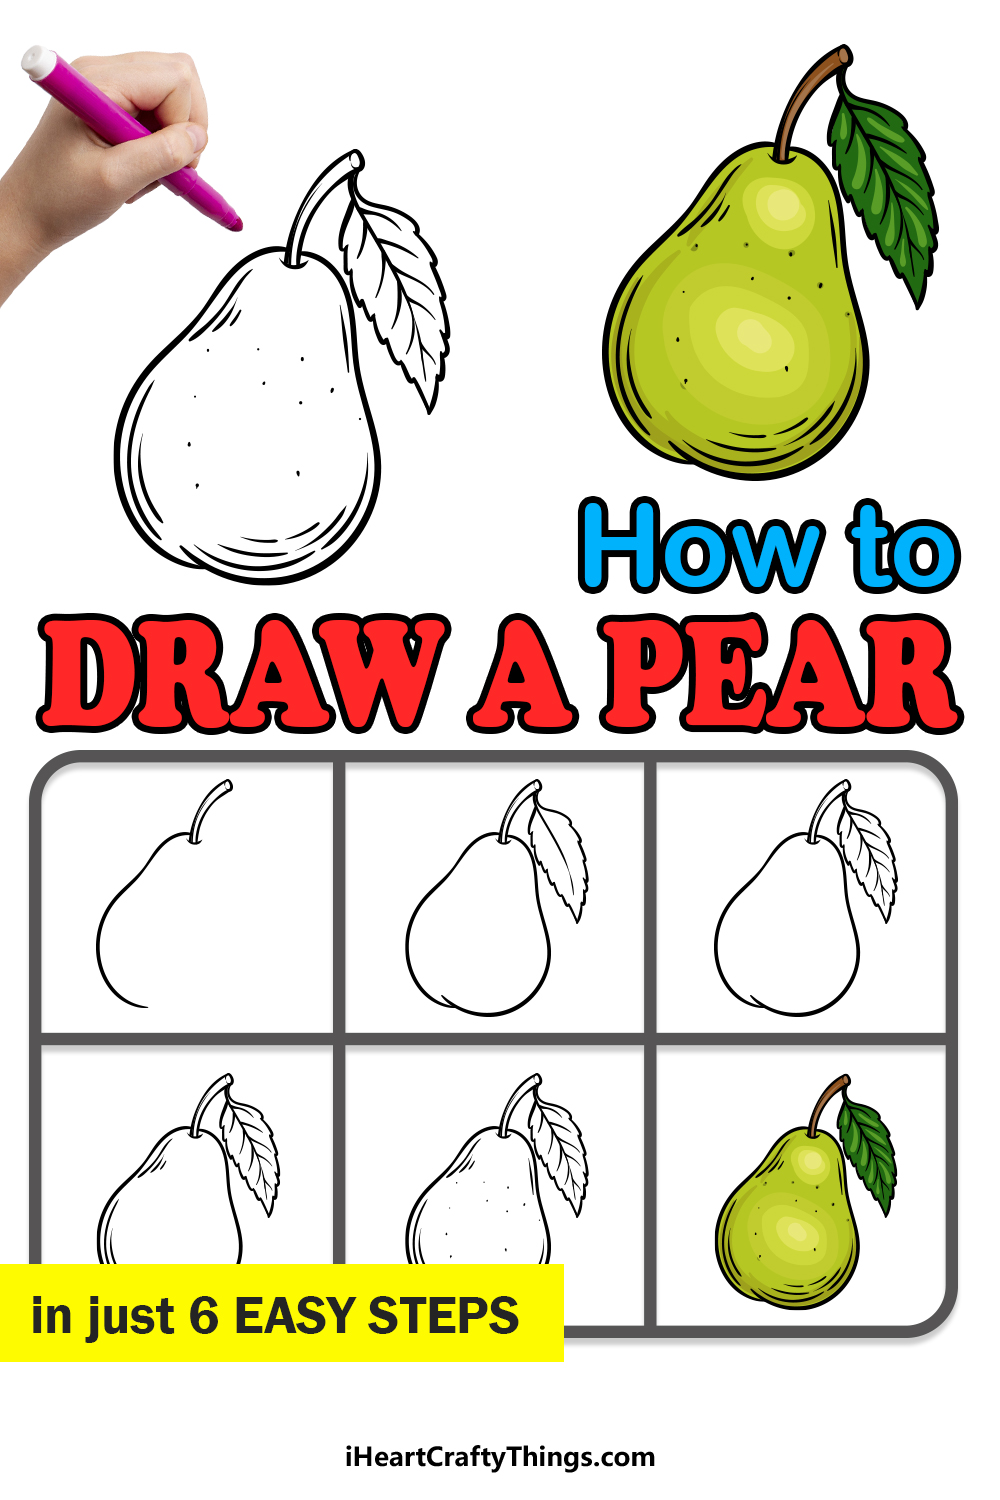 How to Draw A Pear in 6 easy steps